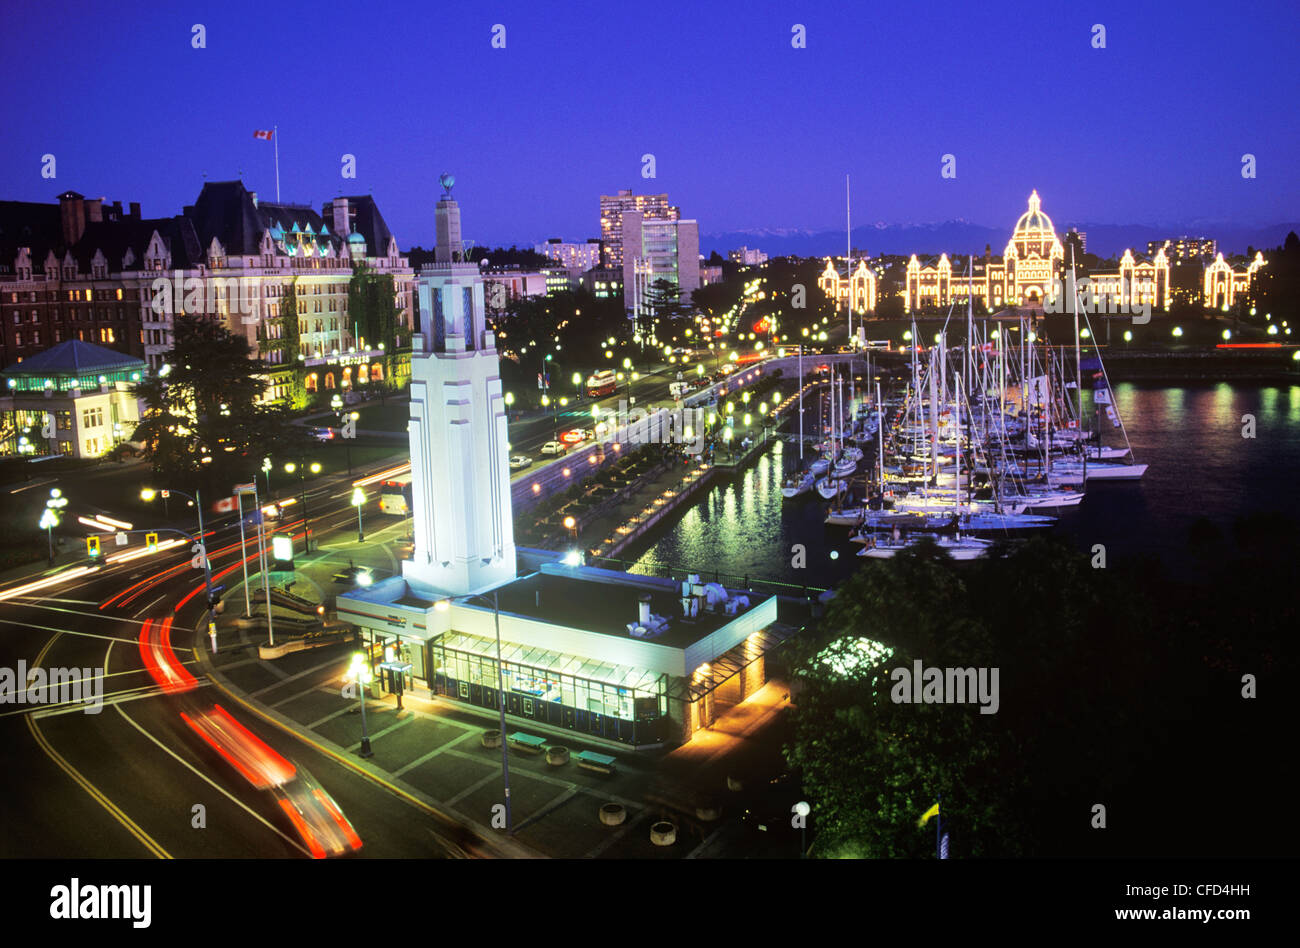 Inner harbour at dusk, wide view, Victoria, Vancouver Island, British Columbia, Canada. Stock Photo